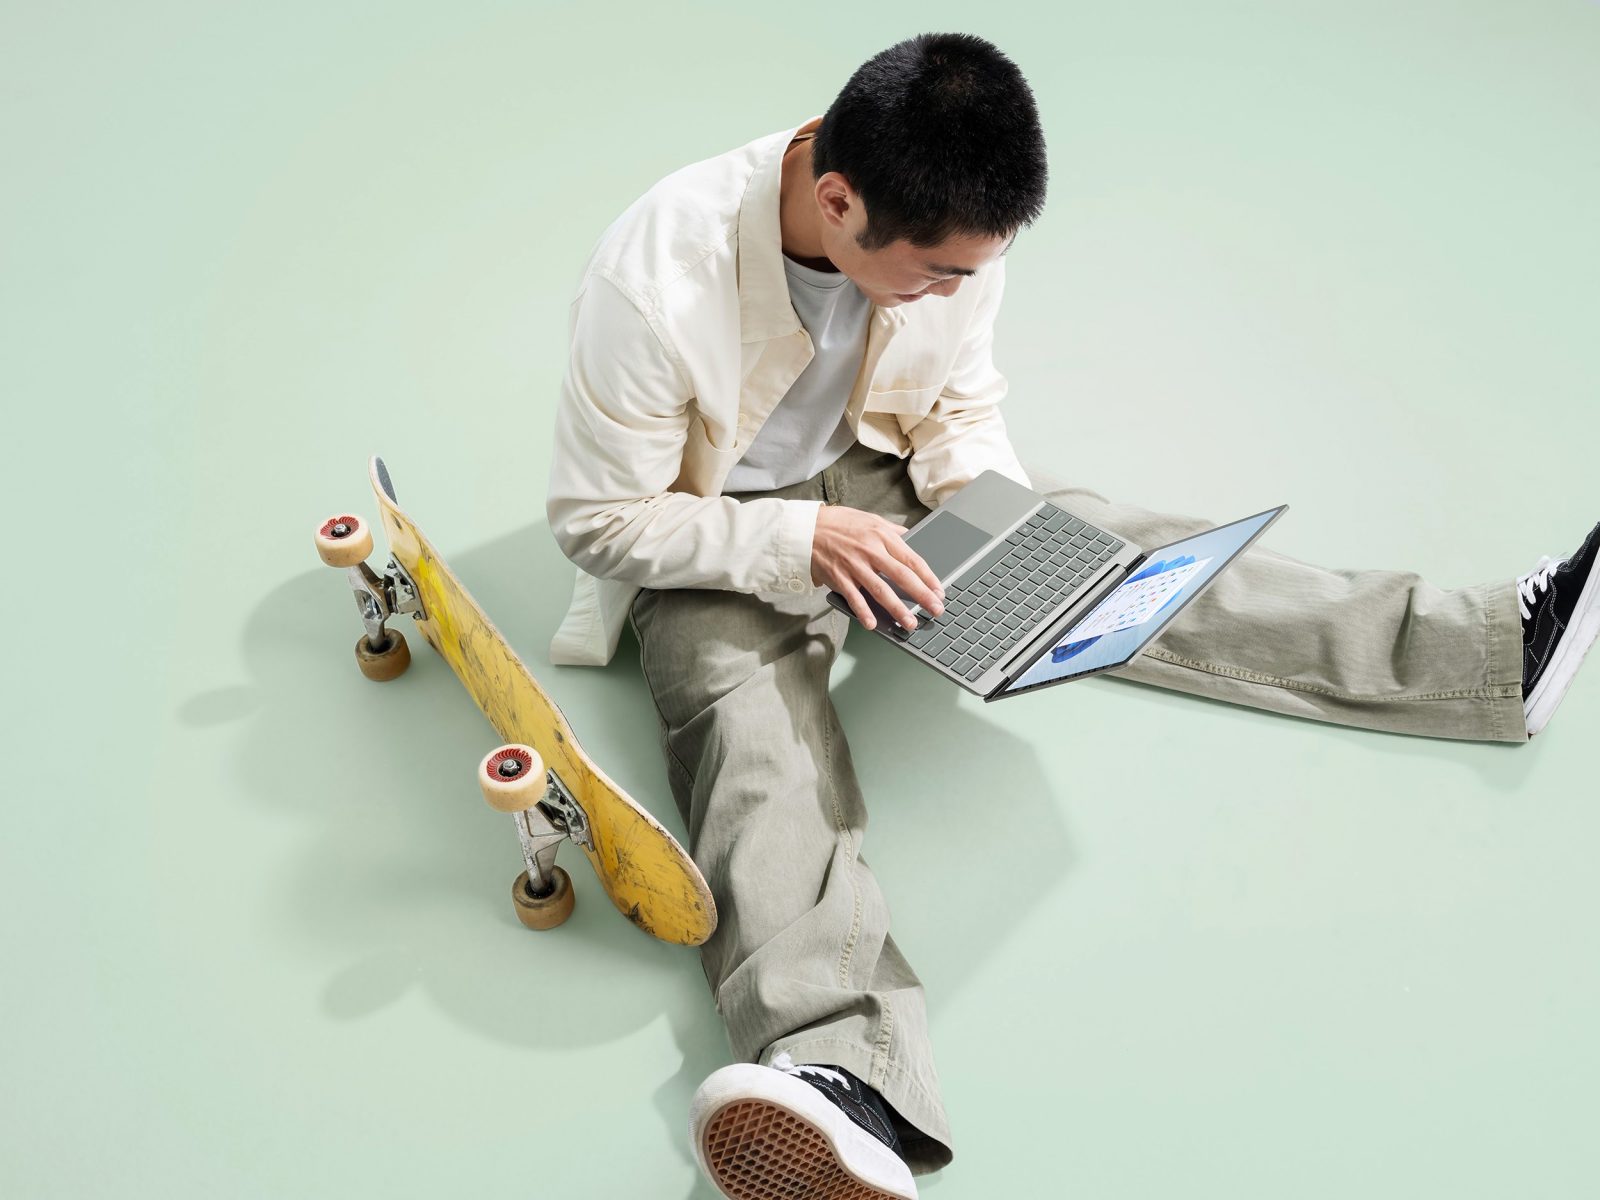 a person looks at laptop device with a skateboard next to him